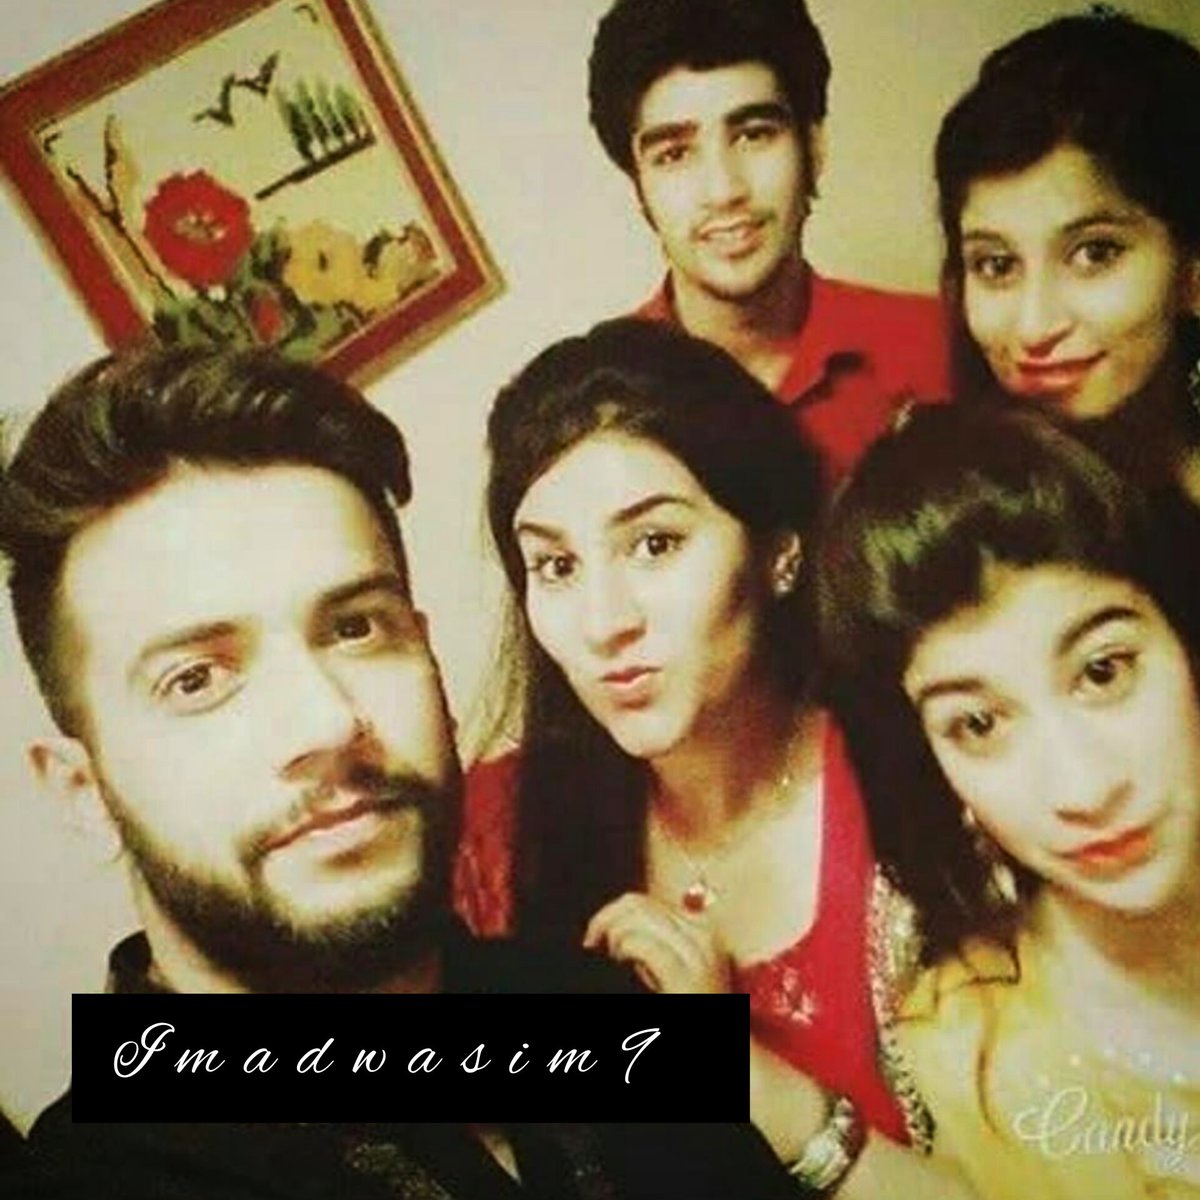 @simadwasim 😍🙌🤗Selfie Picture the way at looked each other with Cousin's Family to Home Best Friends @simadwasim❤️ #imadwasim #ImadWasim #Imad #Shadab #Pakistani #Cricket #CricketTwitter #BabarAzam𓃵 #BabarAzam #Rizwan #Shaheen #PAKvIRE #T20WorldCup2024 #PAKvsIRE #HarisRauf